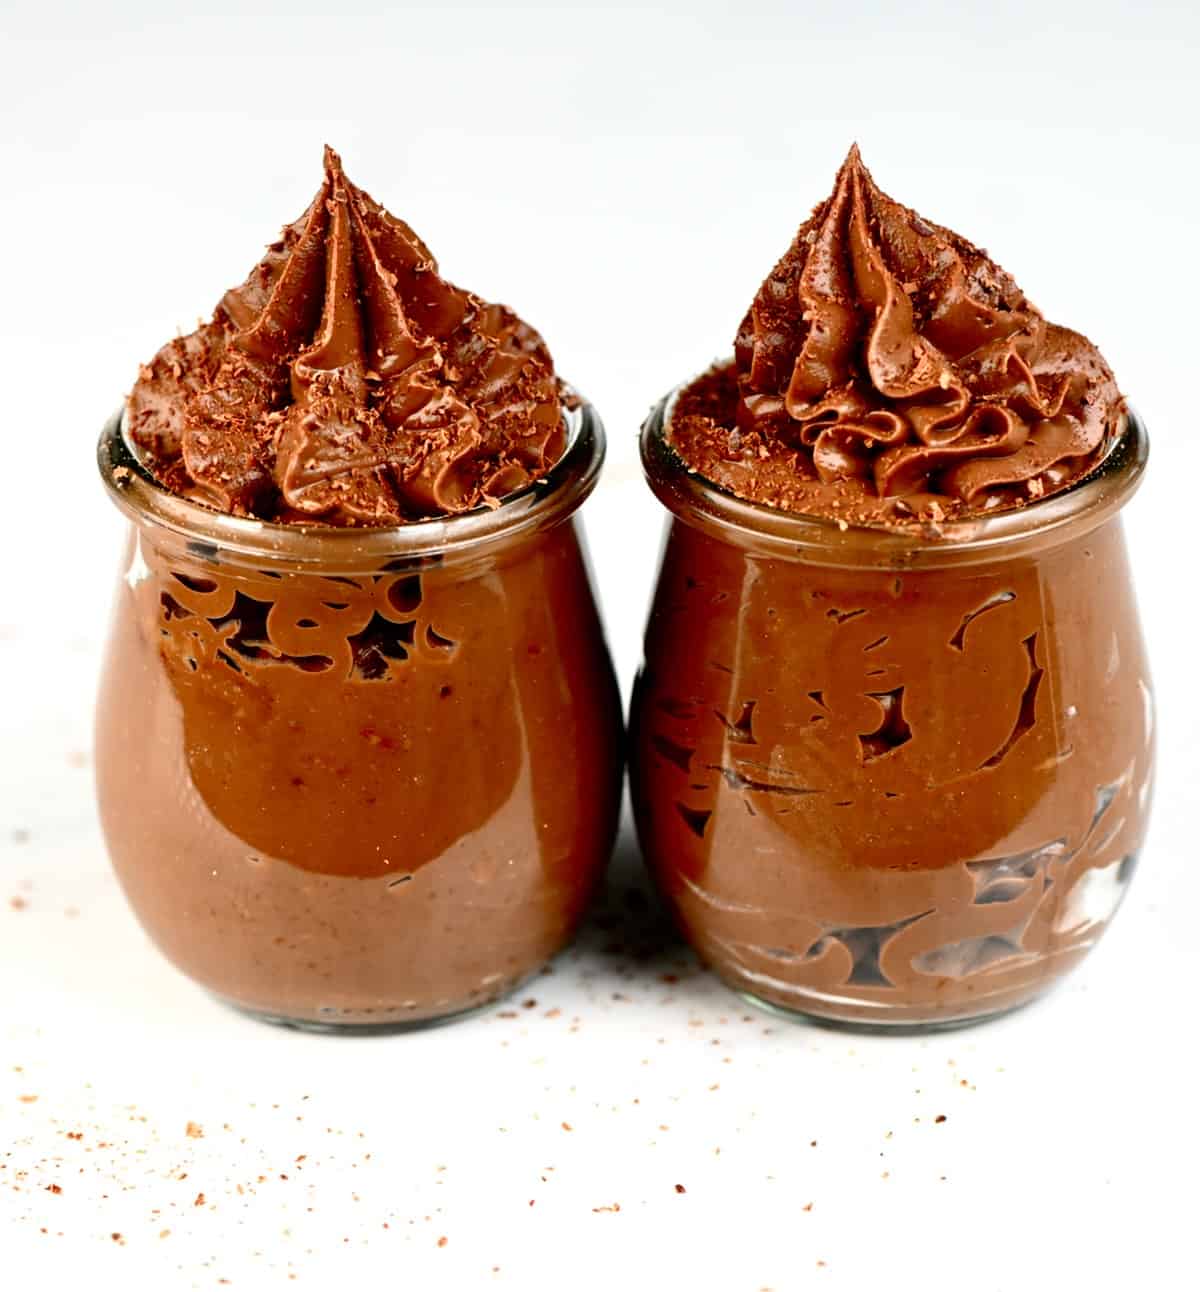 Two little jars with Chocolate Pastry Cream